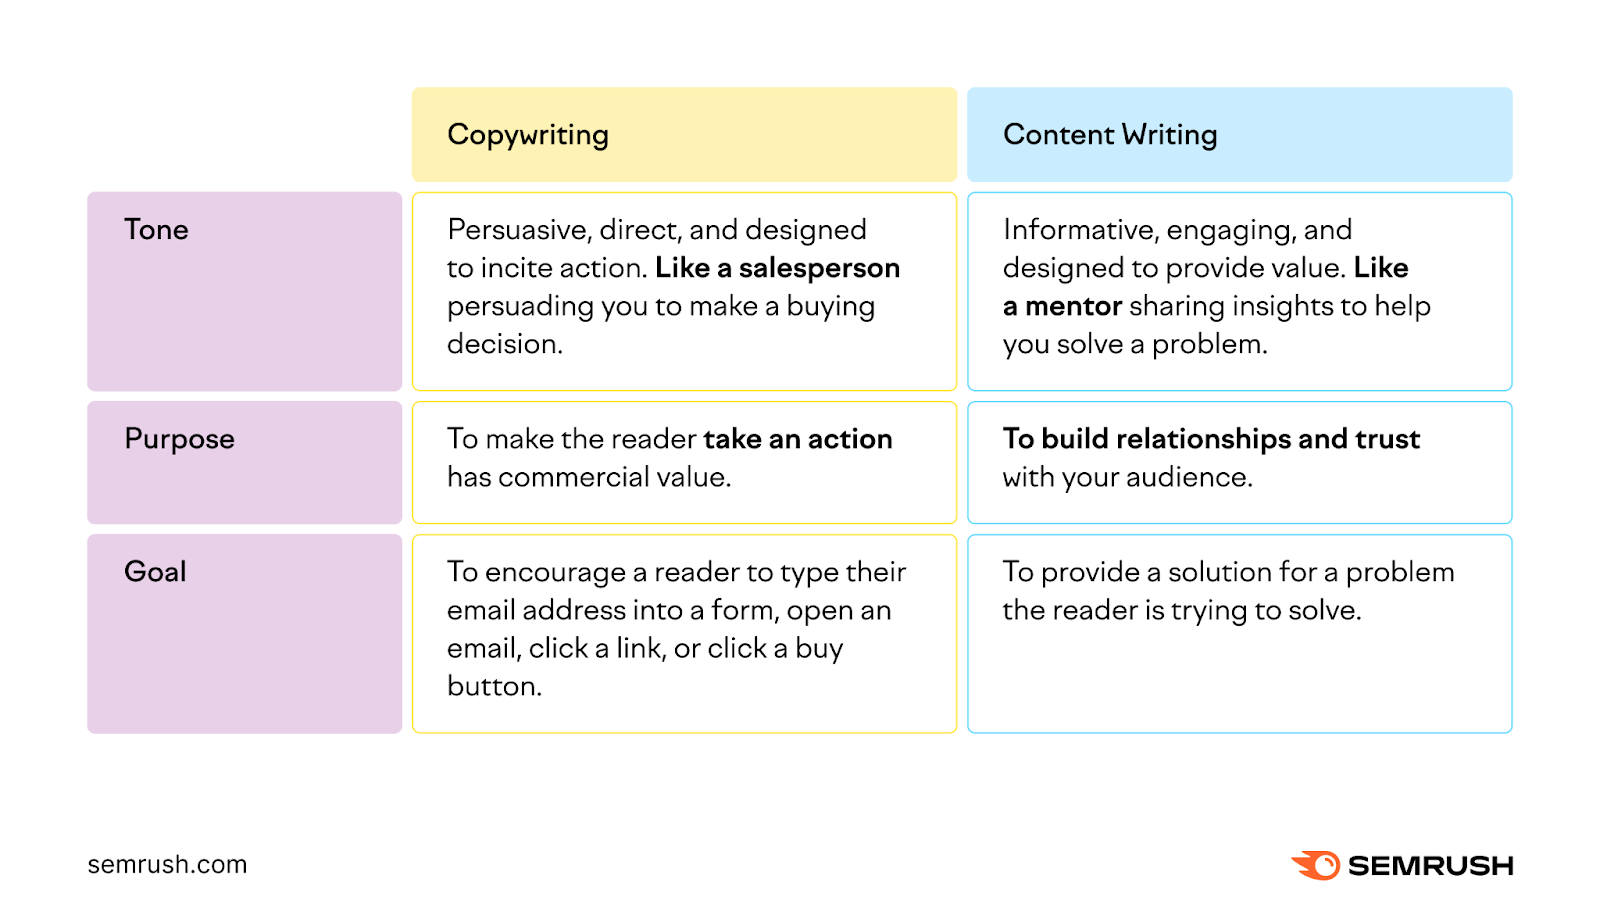 A table listing the key differences of copywriting vs. content writing, in regards to tone, purpose and goal of each